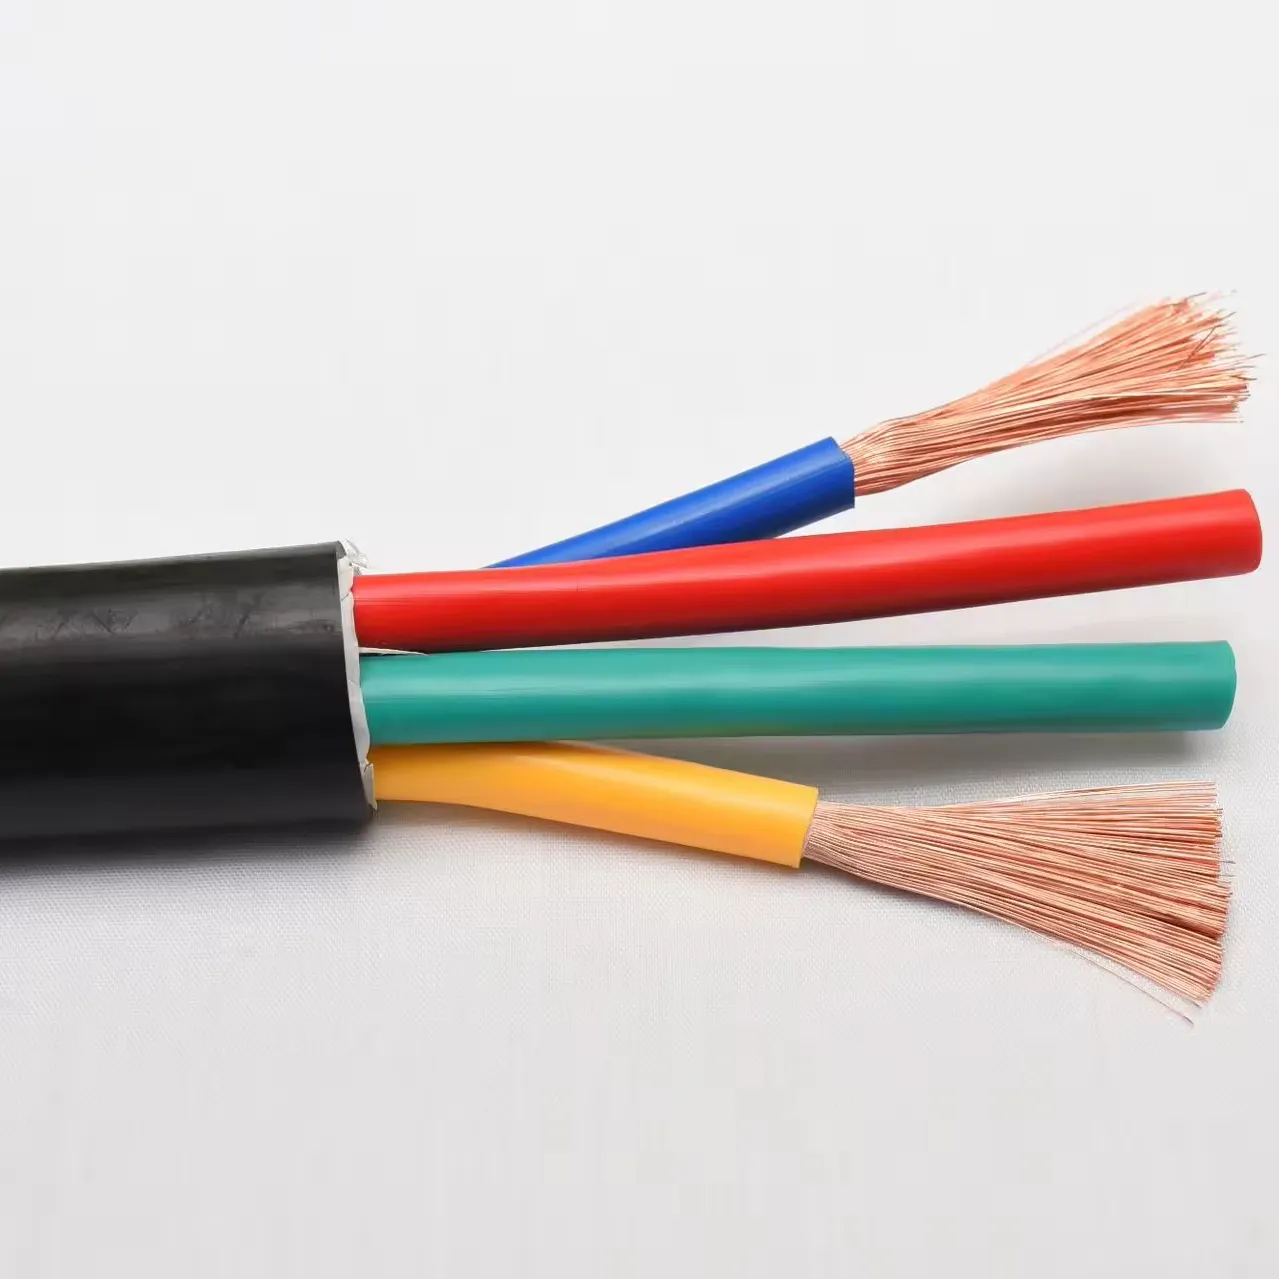 Multi-cores RVV 2 3 4 0.5 0.75 1 1.5 2.5 4 6 MM Flexible Electrical Power Cable Wire Royal Cord Underground Low Voltage